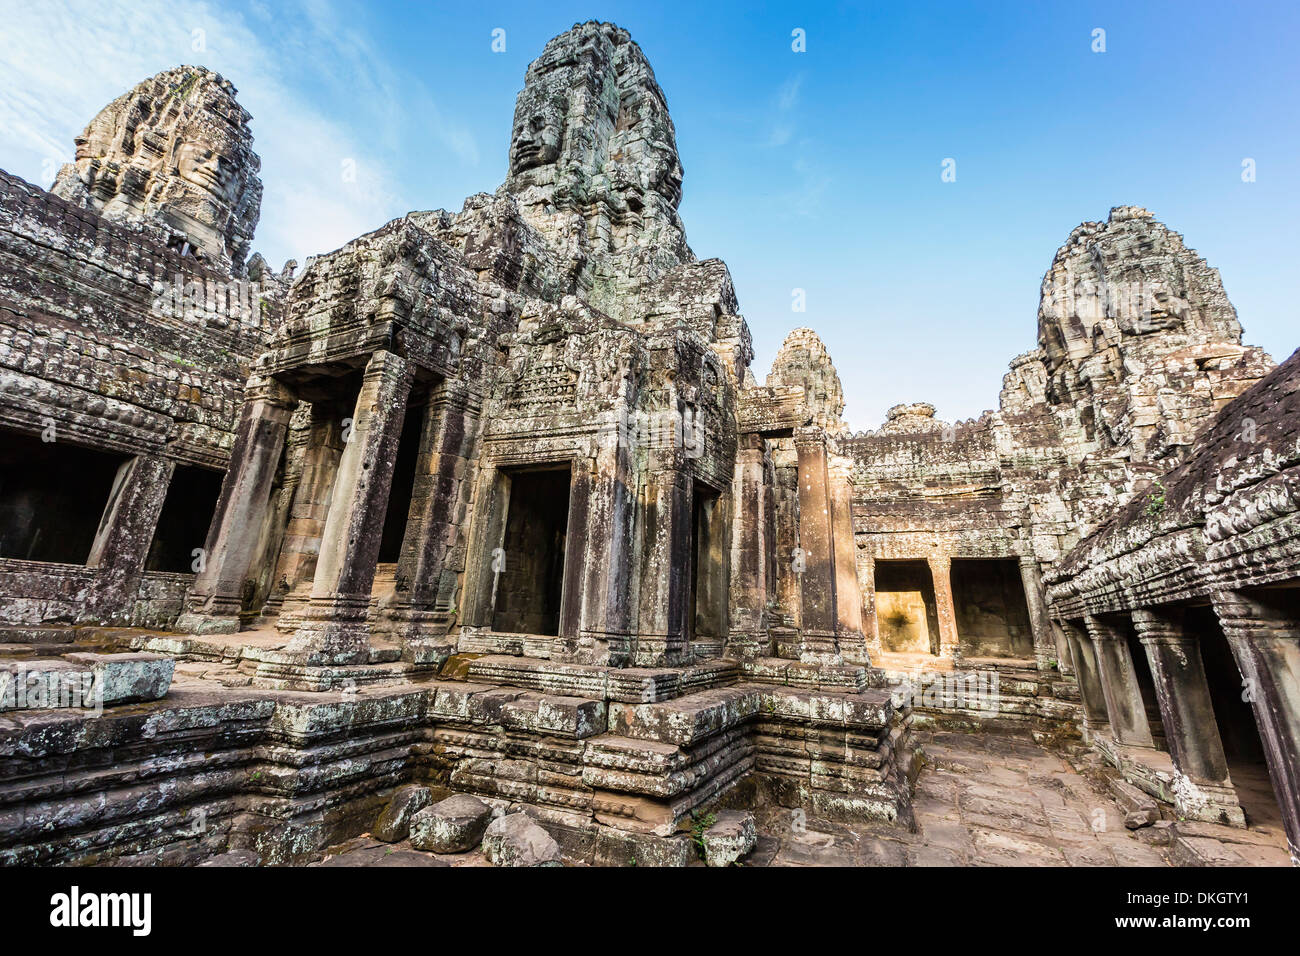 Face towers in Bayon Temple in Angkor Thom, Angkor, UNESCO World Heritage Site, Siem Reap Province, Cambodia, Southeast Asia Stock Photo